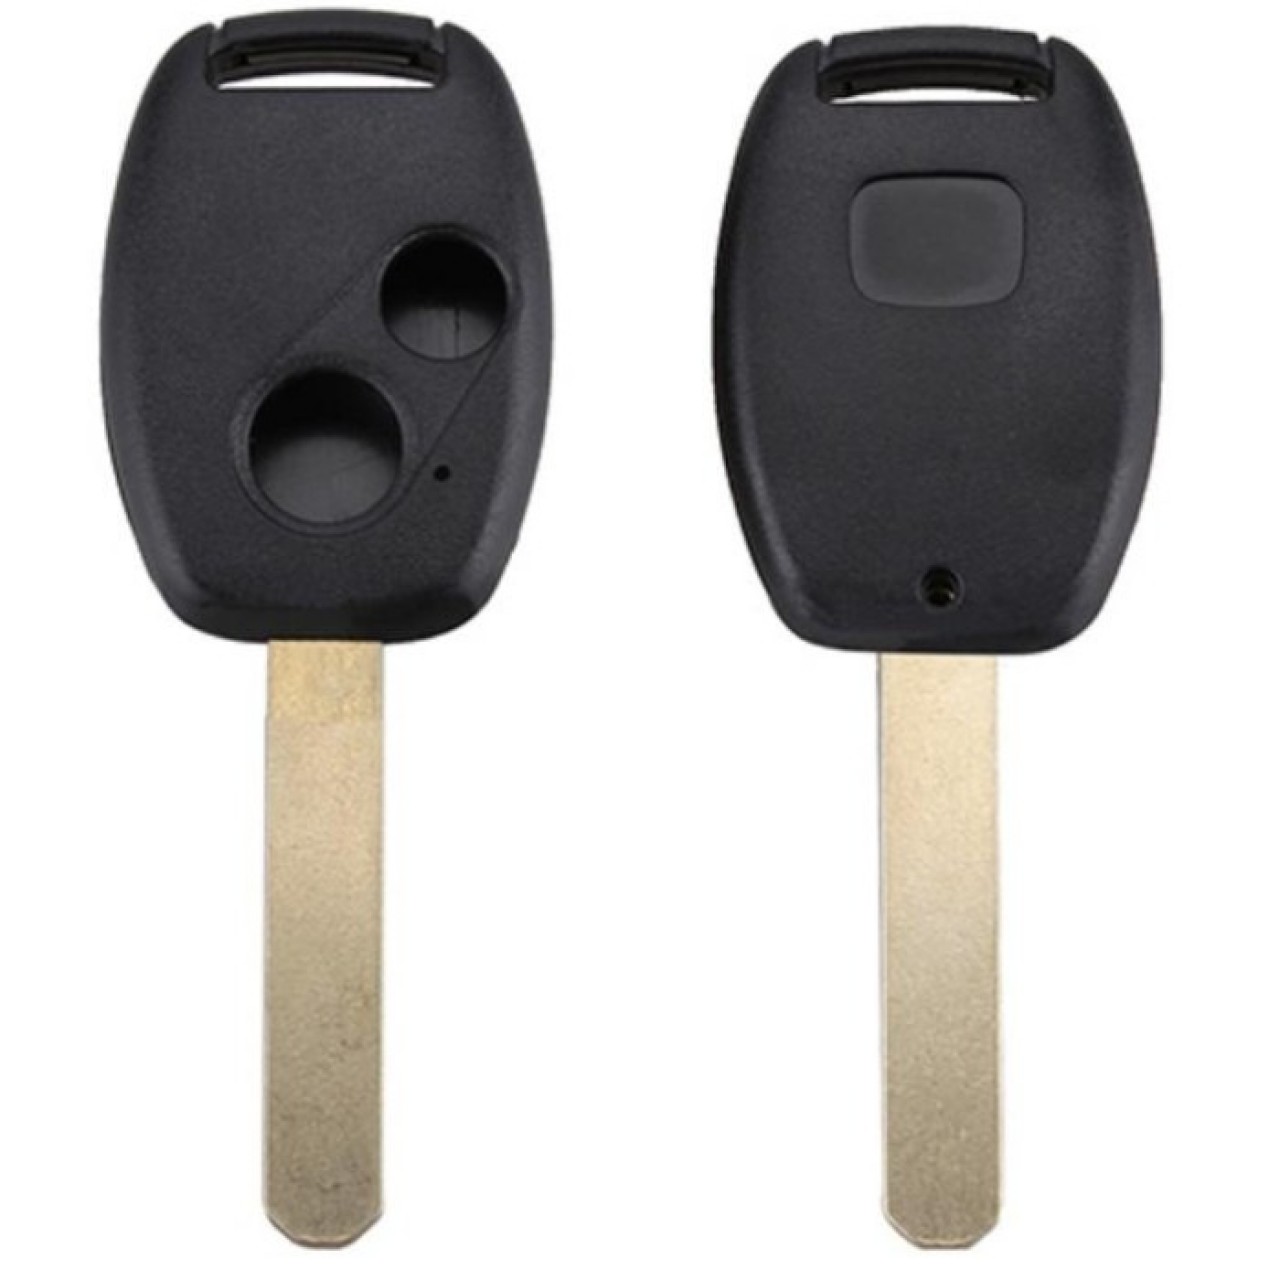 Remote Key Fob Case 2 Buttons ABS Shell Fit for Honda Replacement